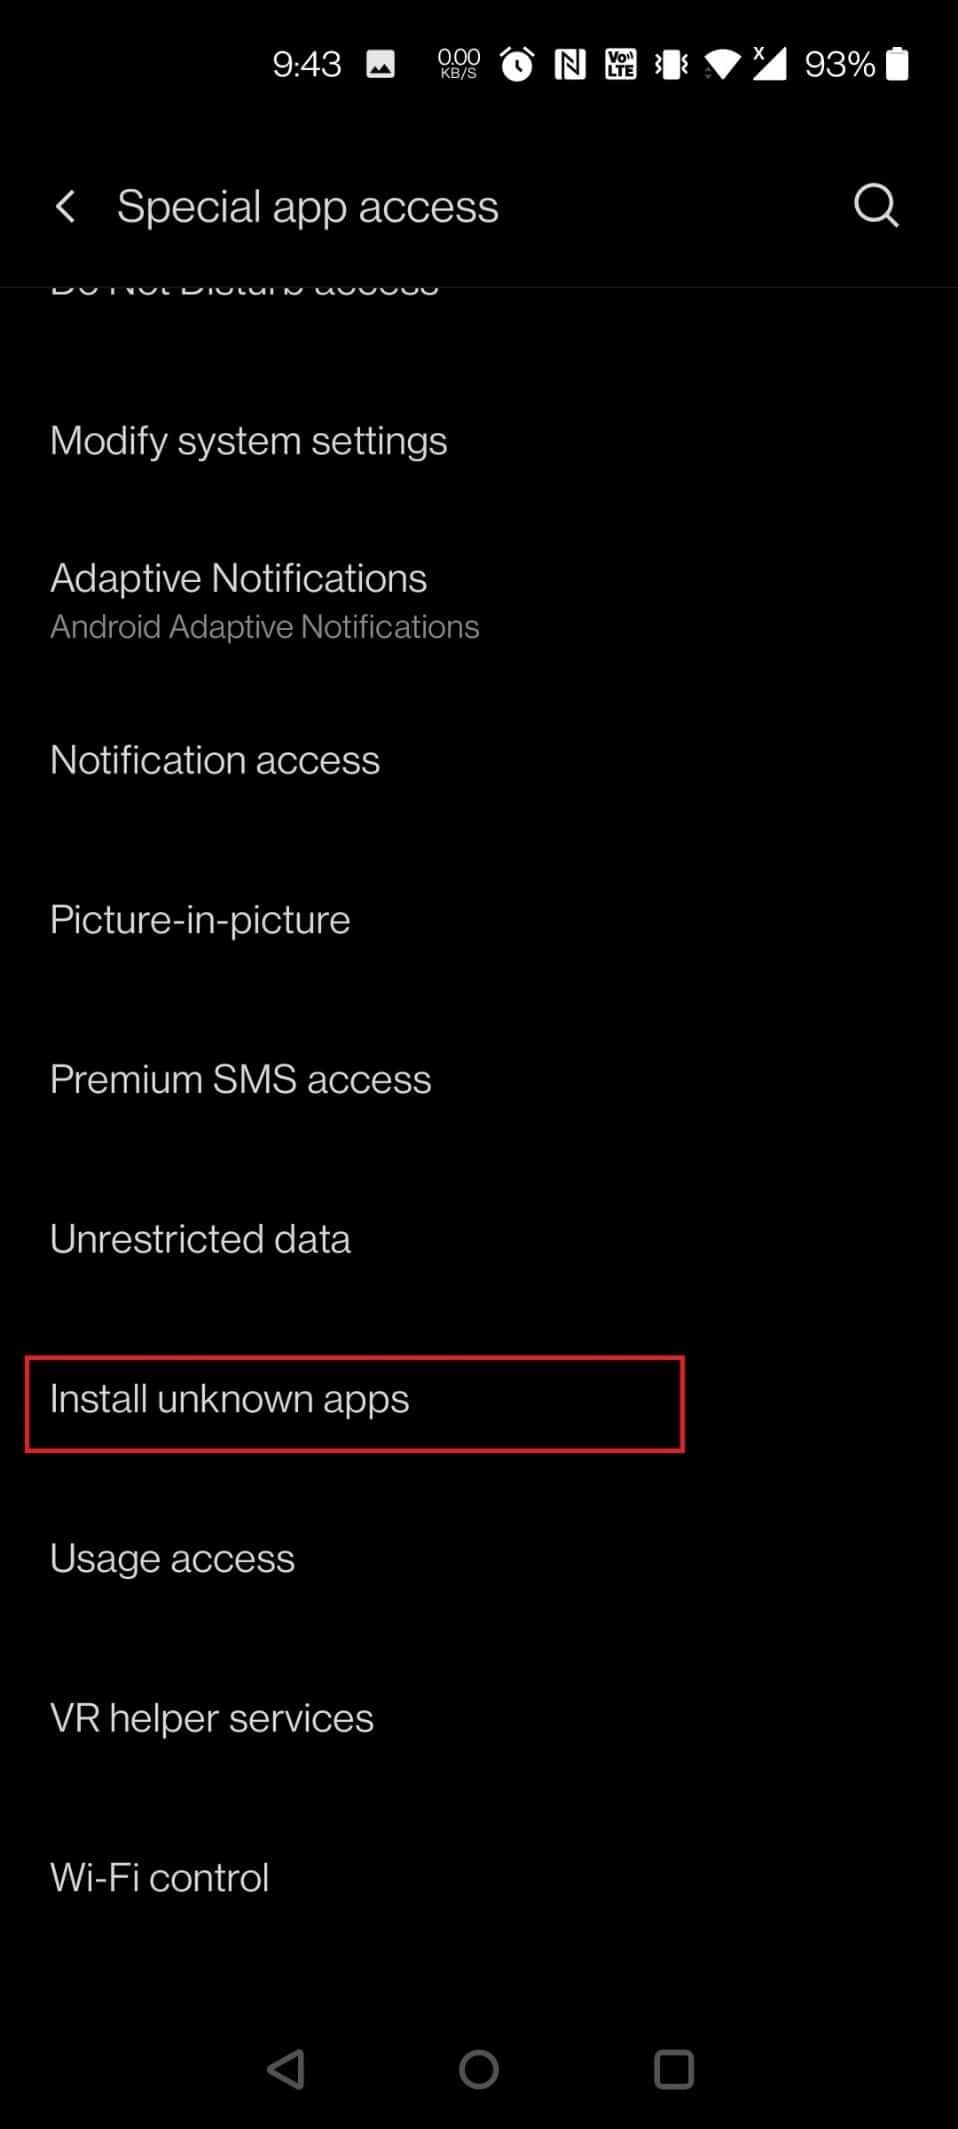 Scroll down and tap on Install unknown apps